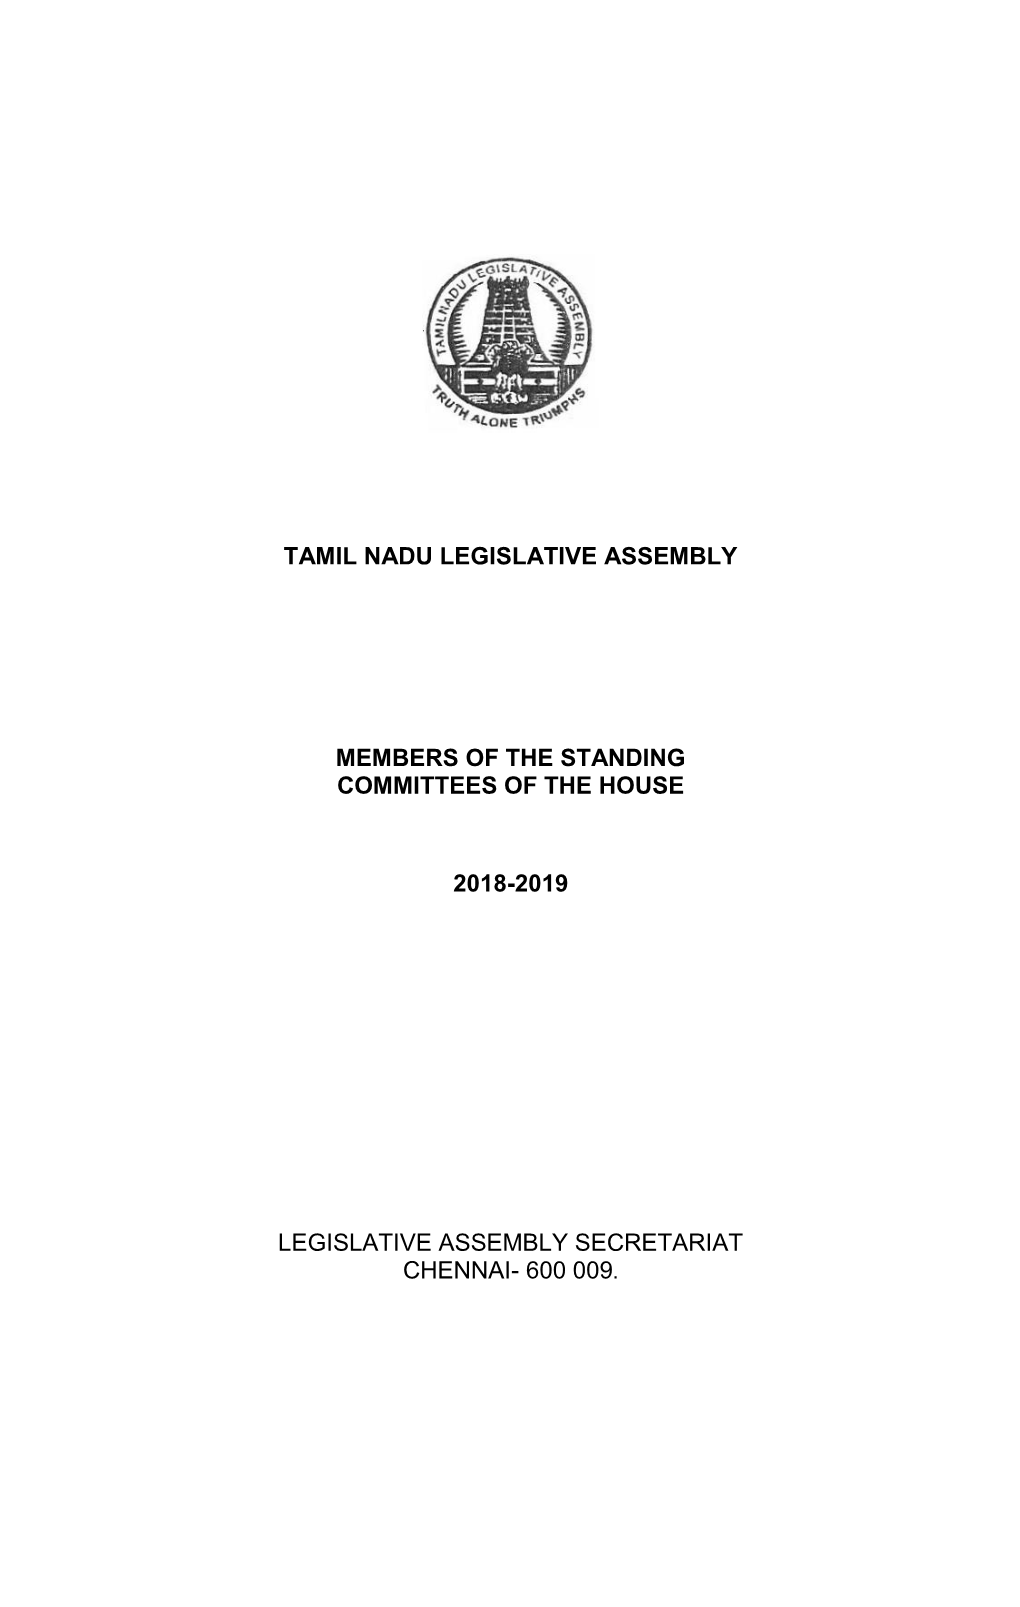 Committee on Government Assurances